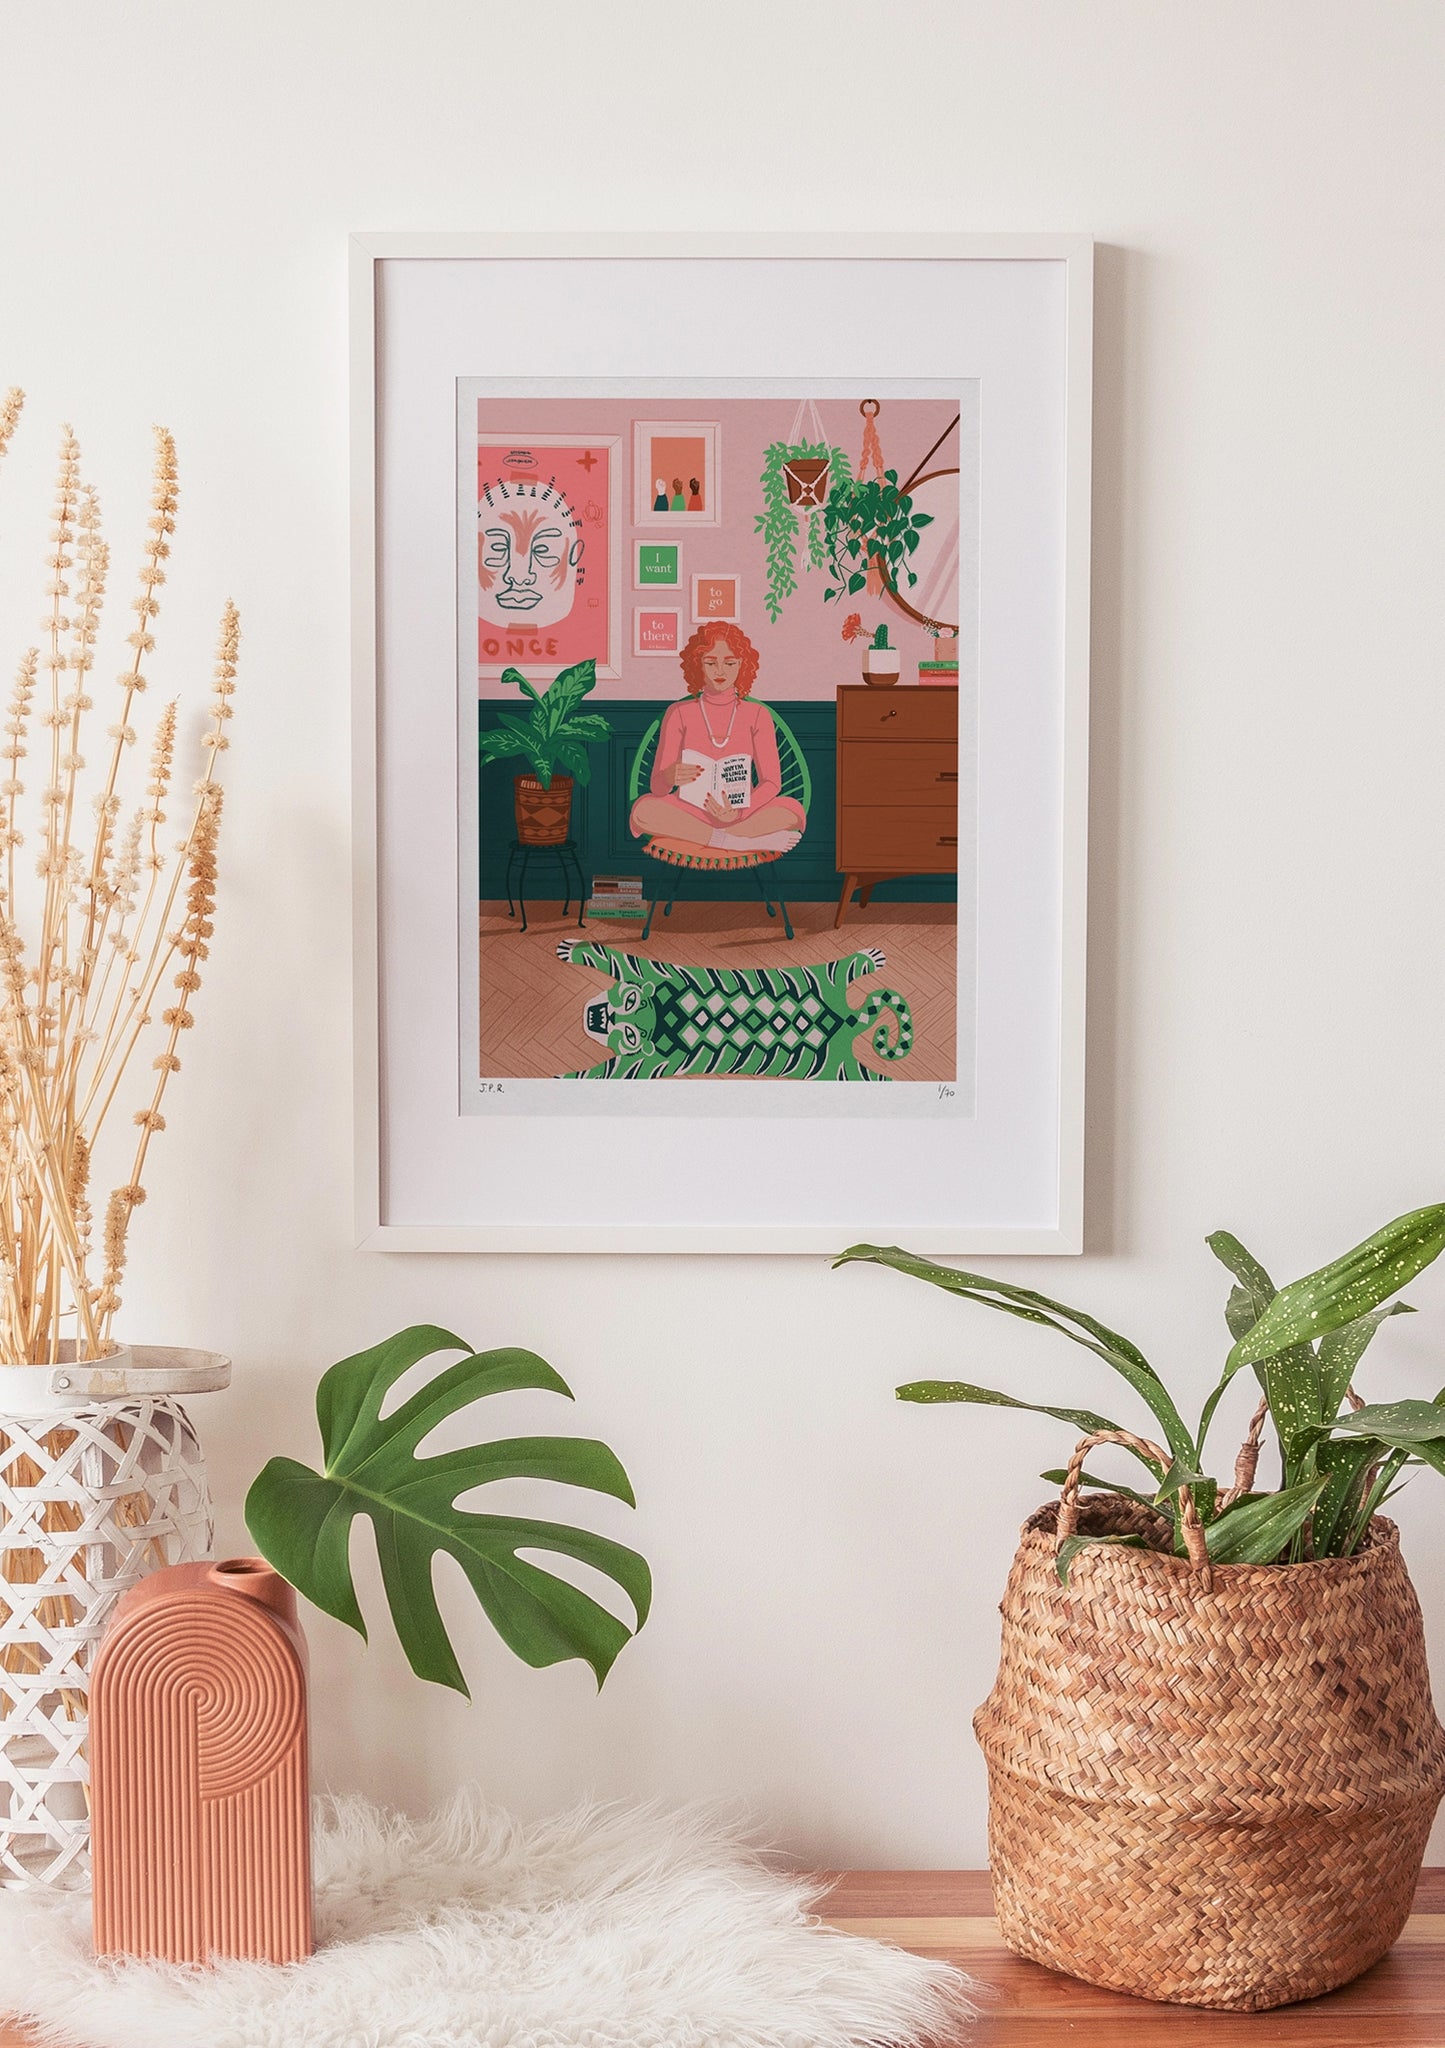 Framed illustration of a White woman reading the book Why I'm No Longer Talking To White People About Race by Reni Eddo-Lodge. She is sat in her pink and green living room, surrounded by plants and books